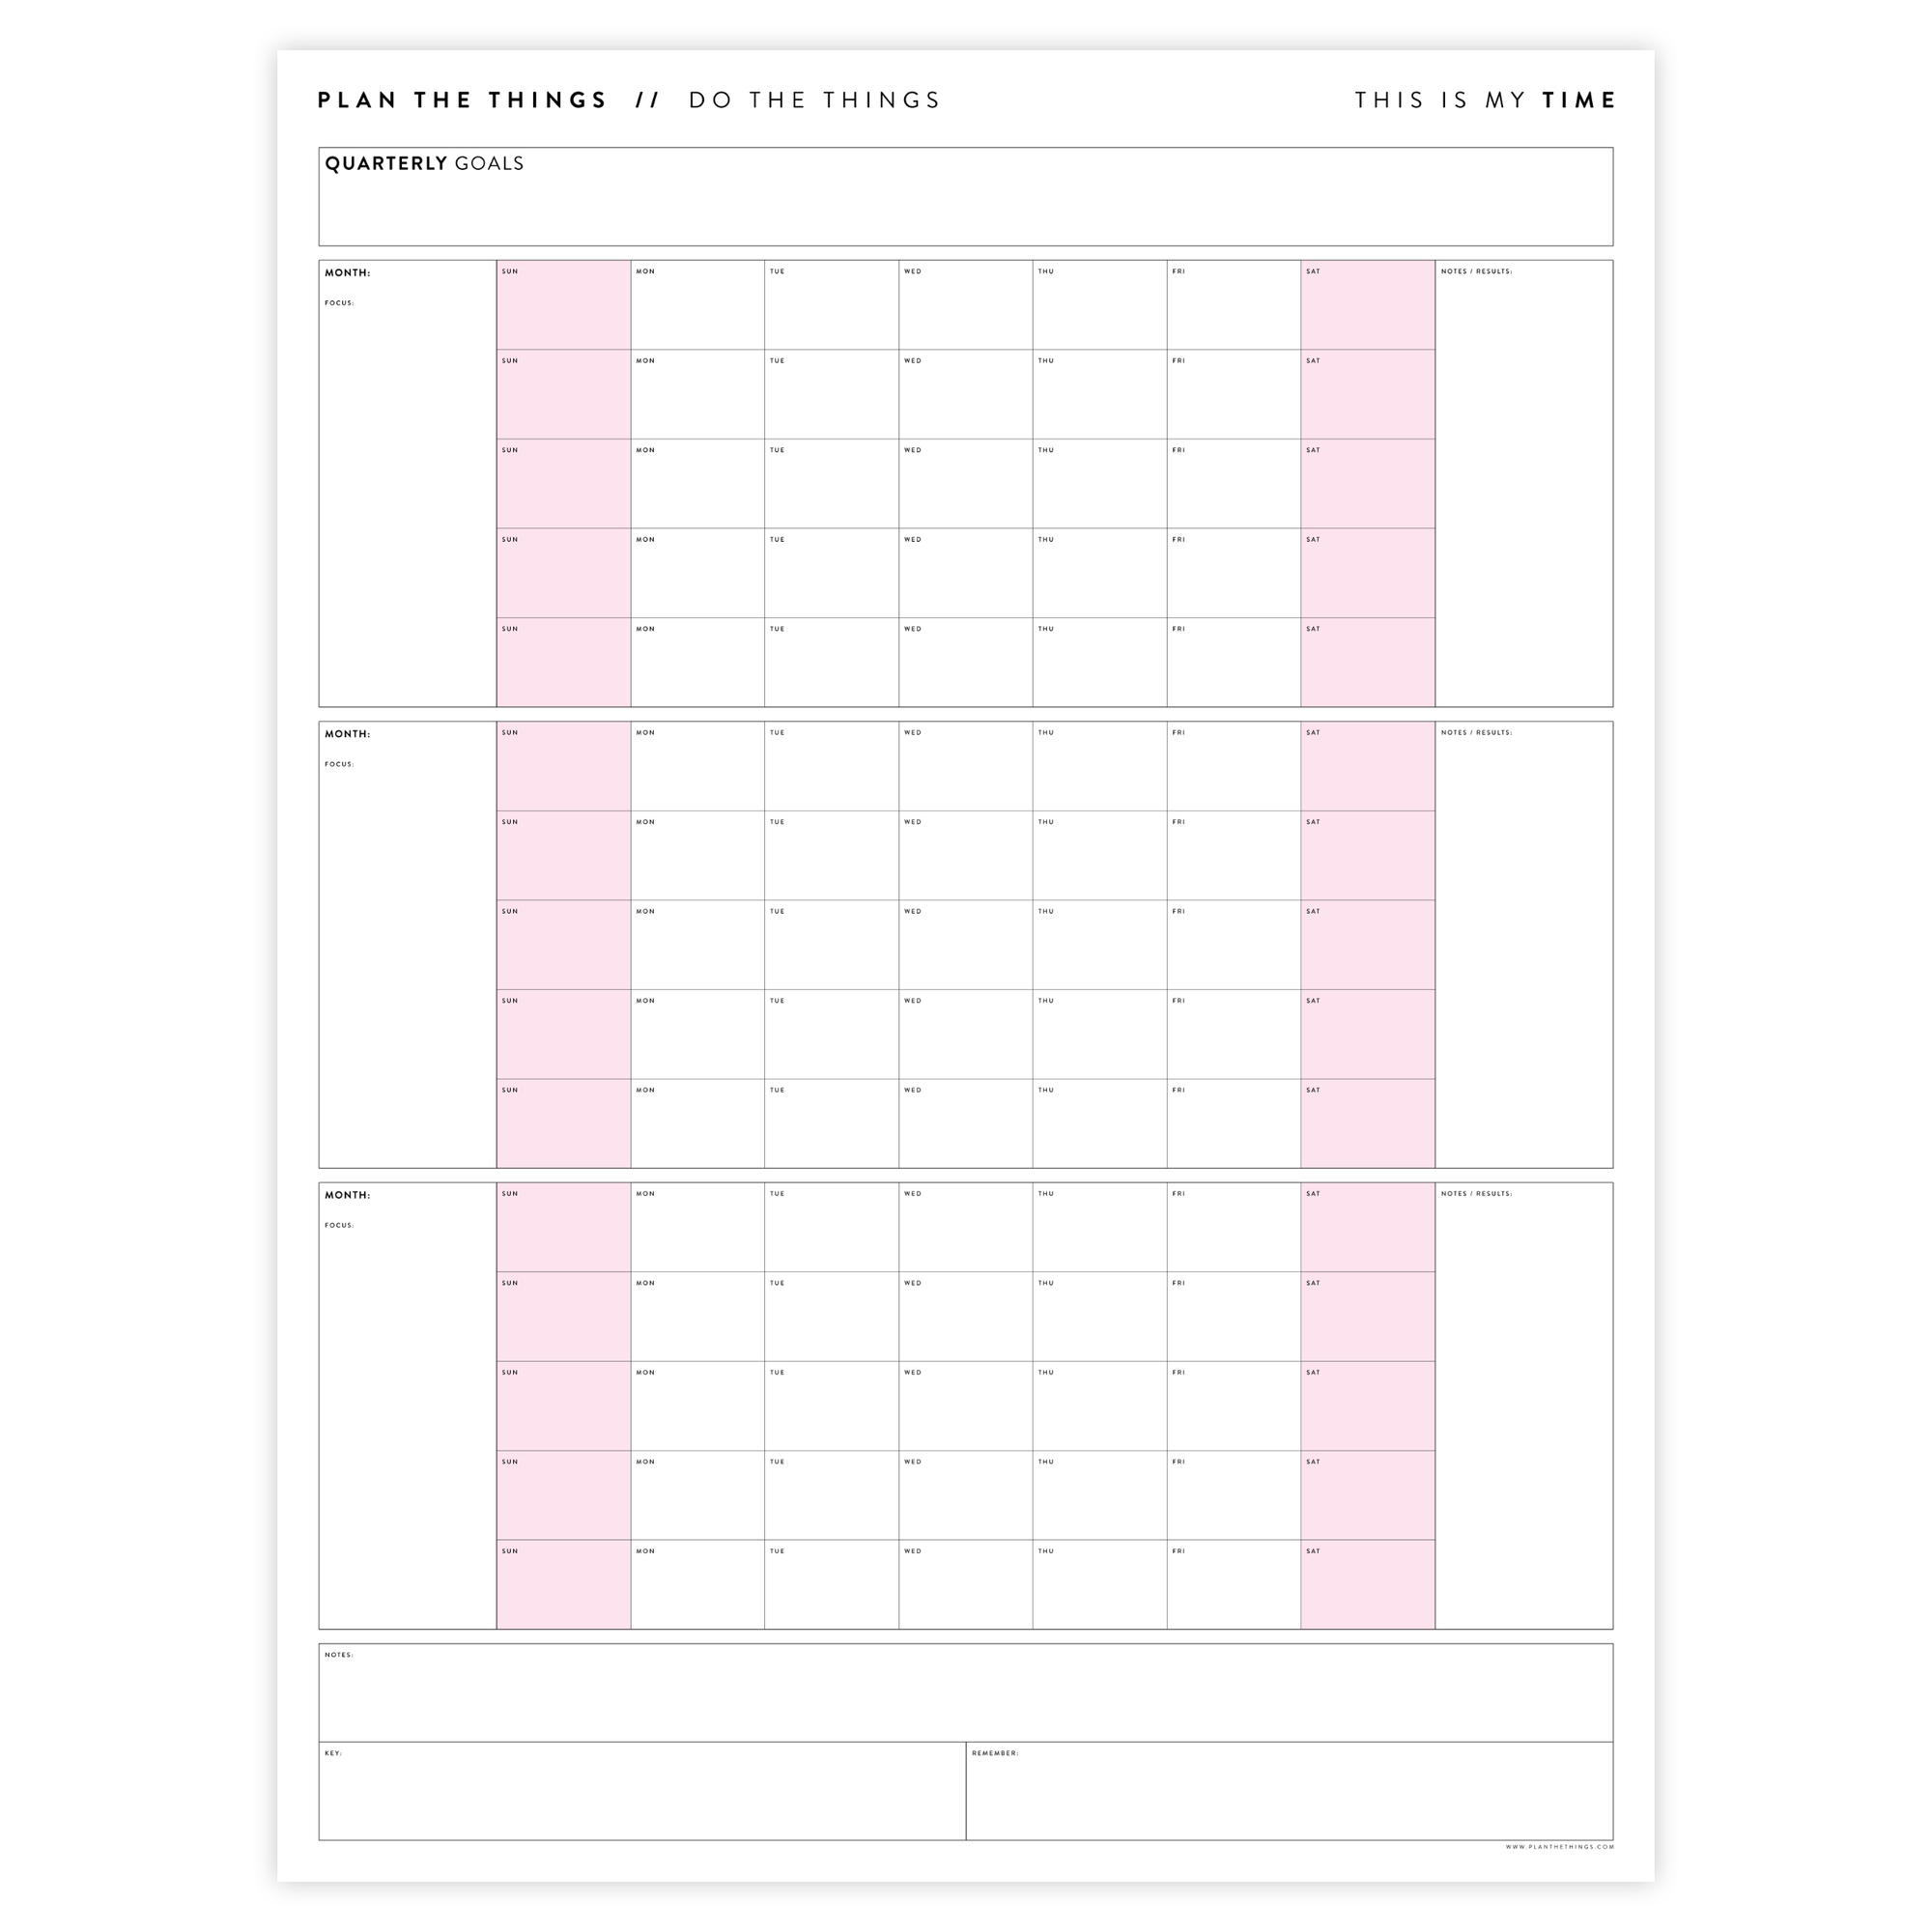 PRINTABLE UNDATED QUARTERLY WALL CALENDAR - SUNDAY START - PINK WEEKENDS - INSTANT DOWNLOAD